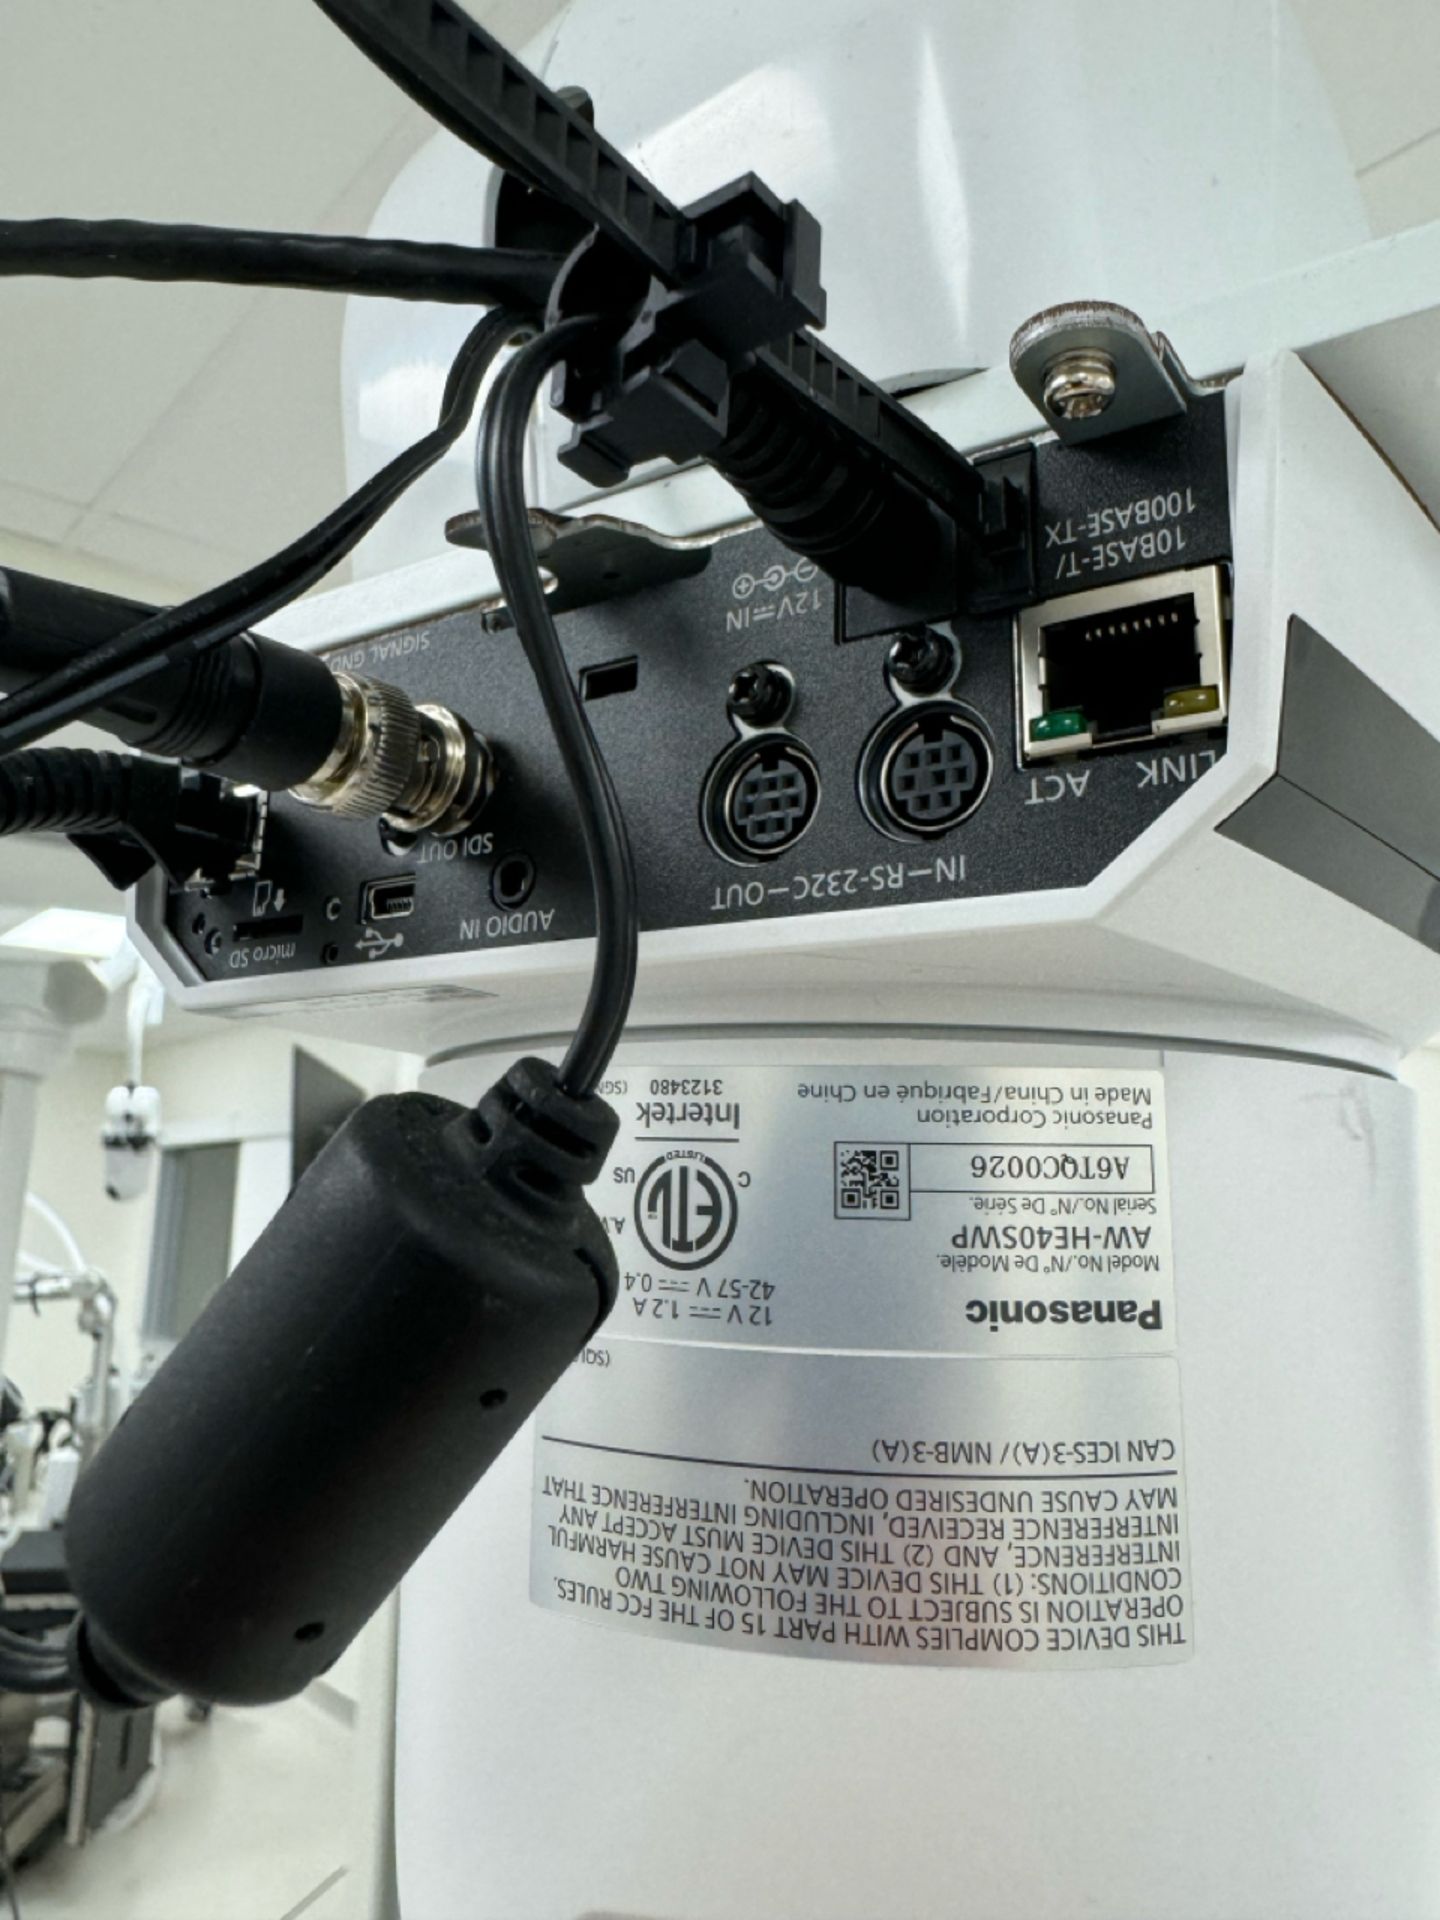 Steris Surgical Lighting System - Image 3 of 7